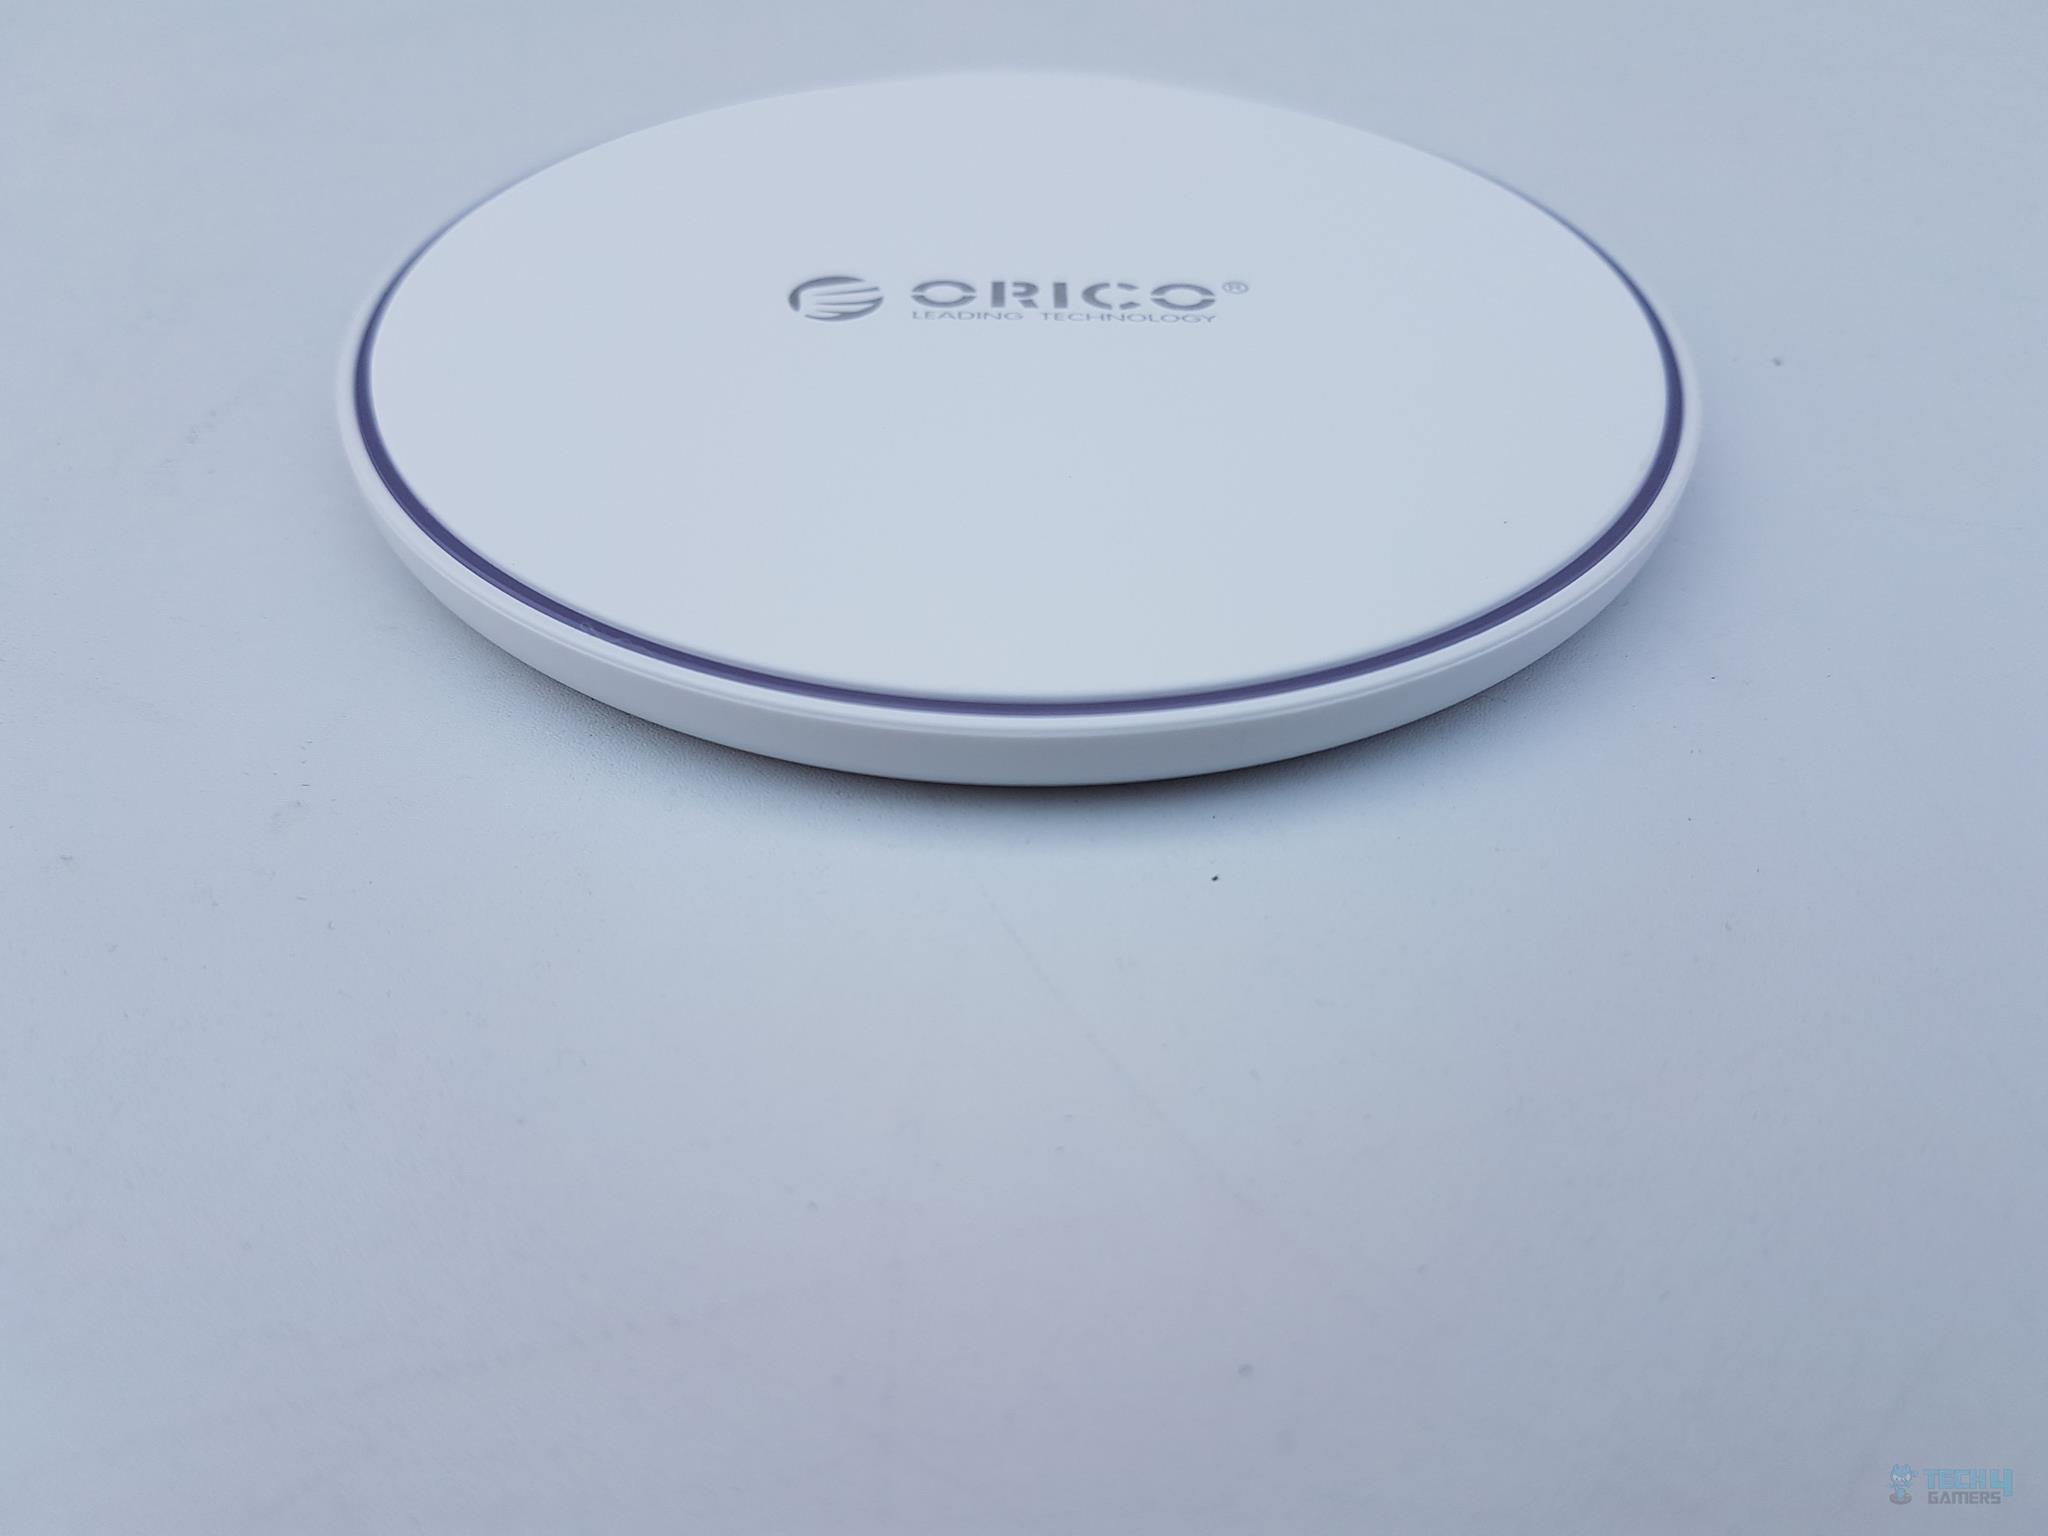 ZMC01 Fast wireless charger Top Cover Closer Look